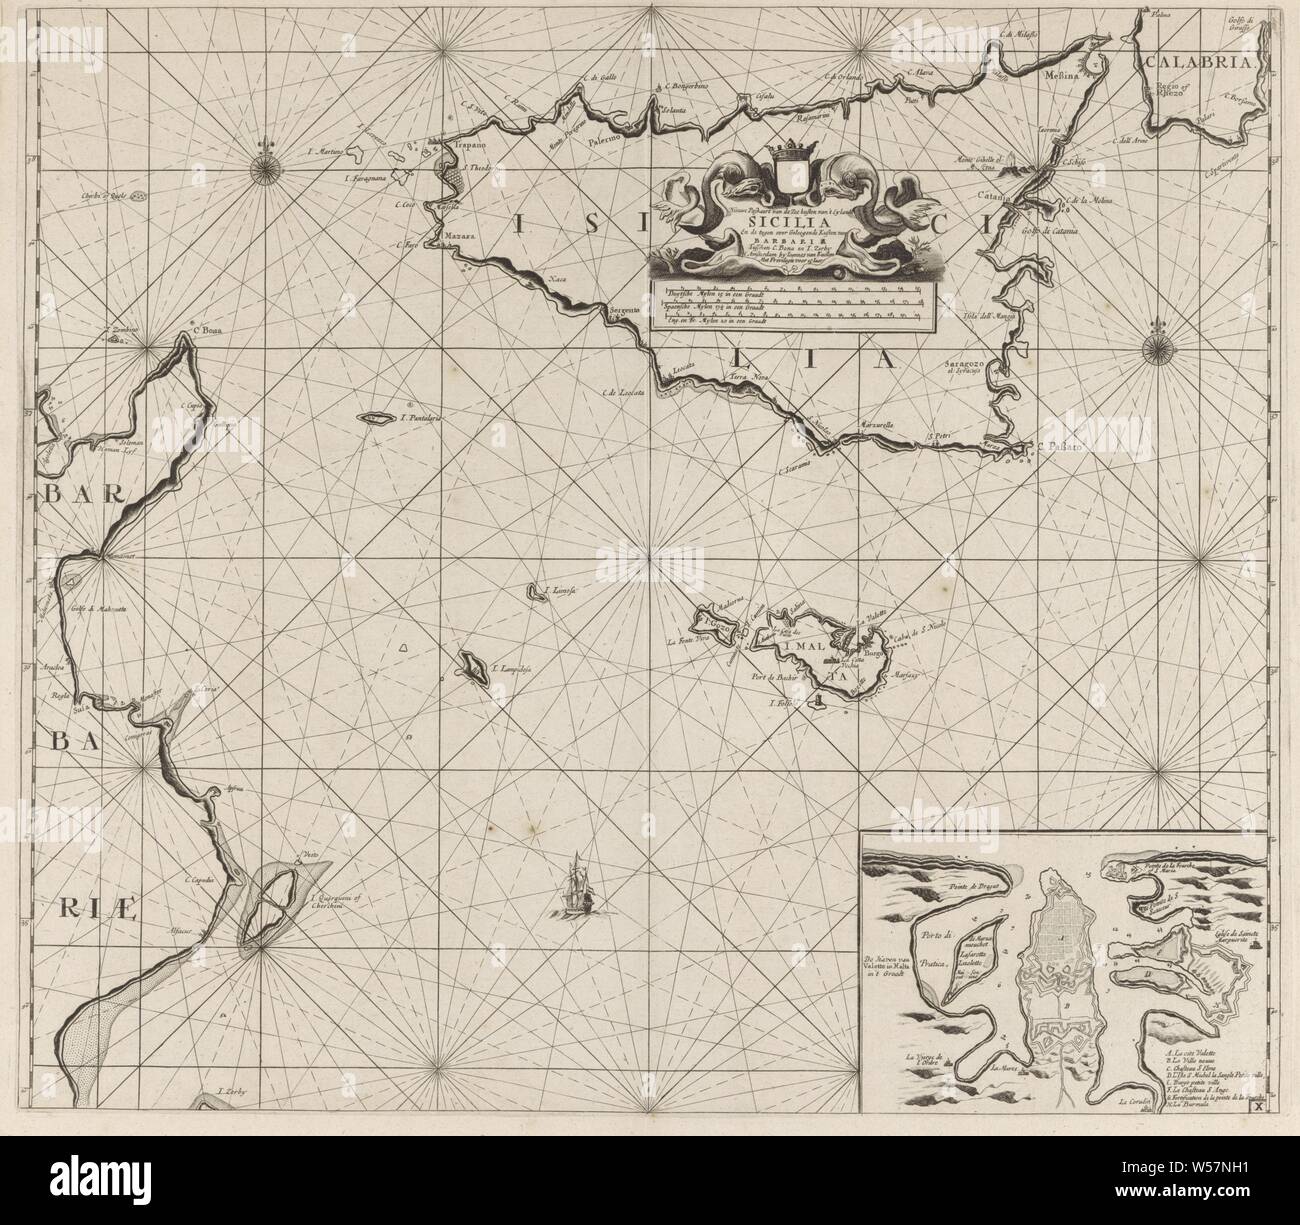 Map of the islands of Sicily and Malta and a part of the coast of Tunisia New pass of the sea coasts of the land of Sicily and the coasts of Barbaria between C. Bona and I. Zerby. (title on object), Map of the islands of Sicily and Malta and part of the coast of Tunisia, with an inset from the port of Valetta on Malta, with two compass roses, the North is above. At the top center the title, the address of the publisher and the scale, shown in German, Spanish and English or French miles (scale: c. 1: 900 000), decorated with two fish, fishes, Tunisia, Sicily, Malta, Jan Luyken (rejected Stock Photo